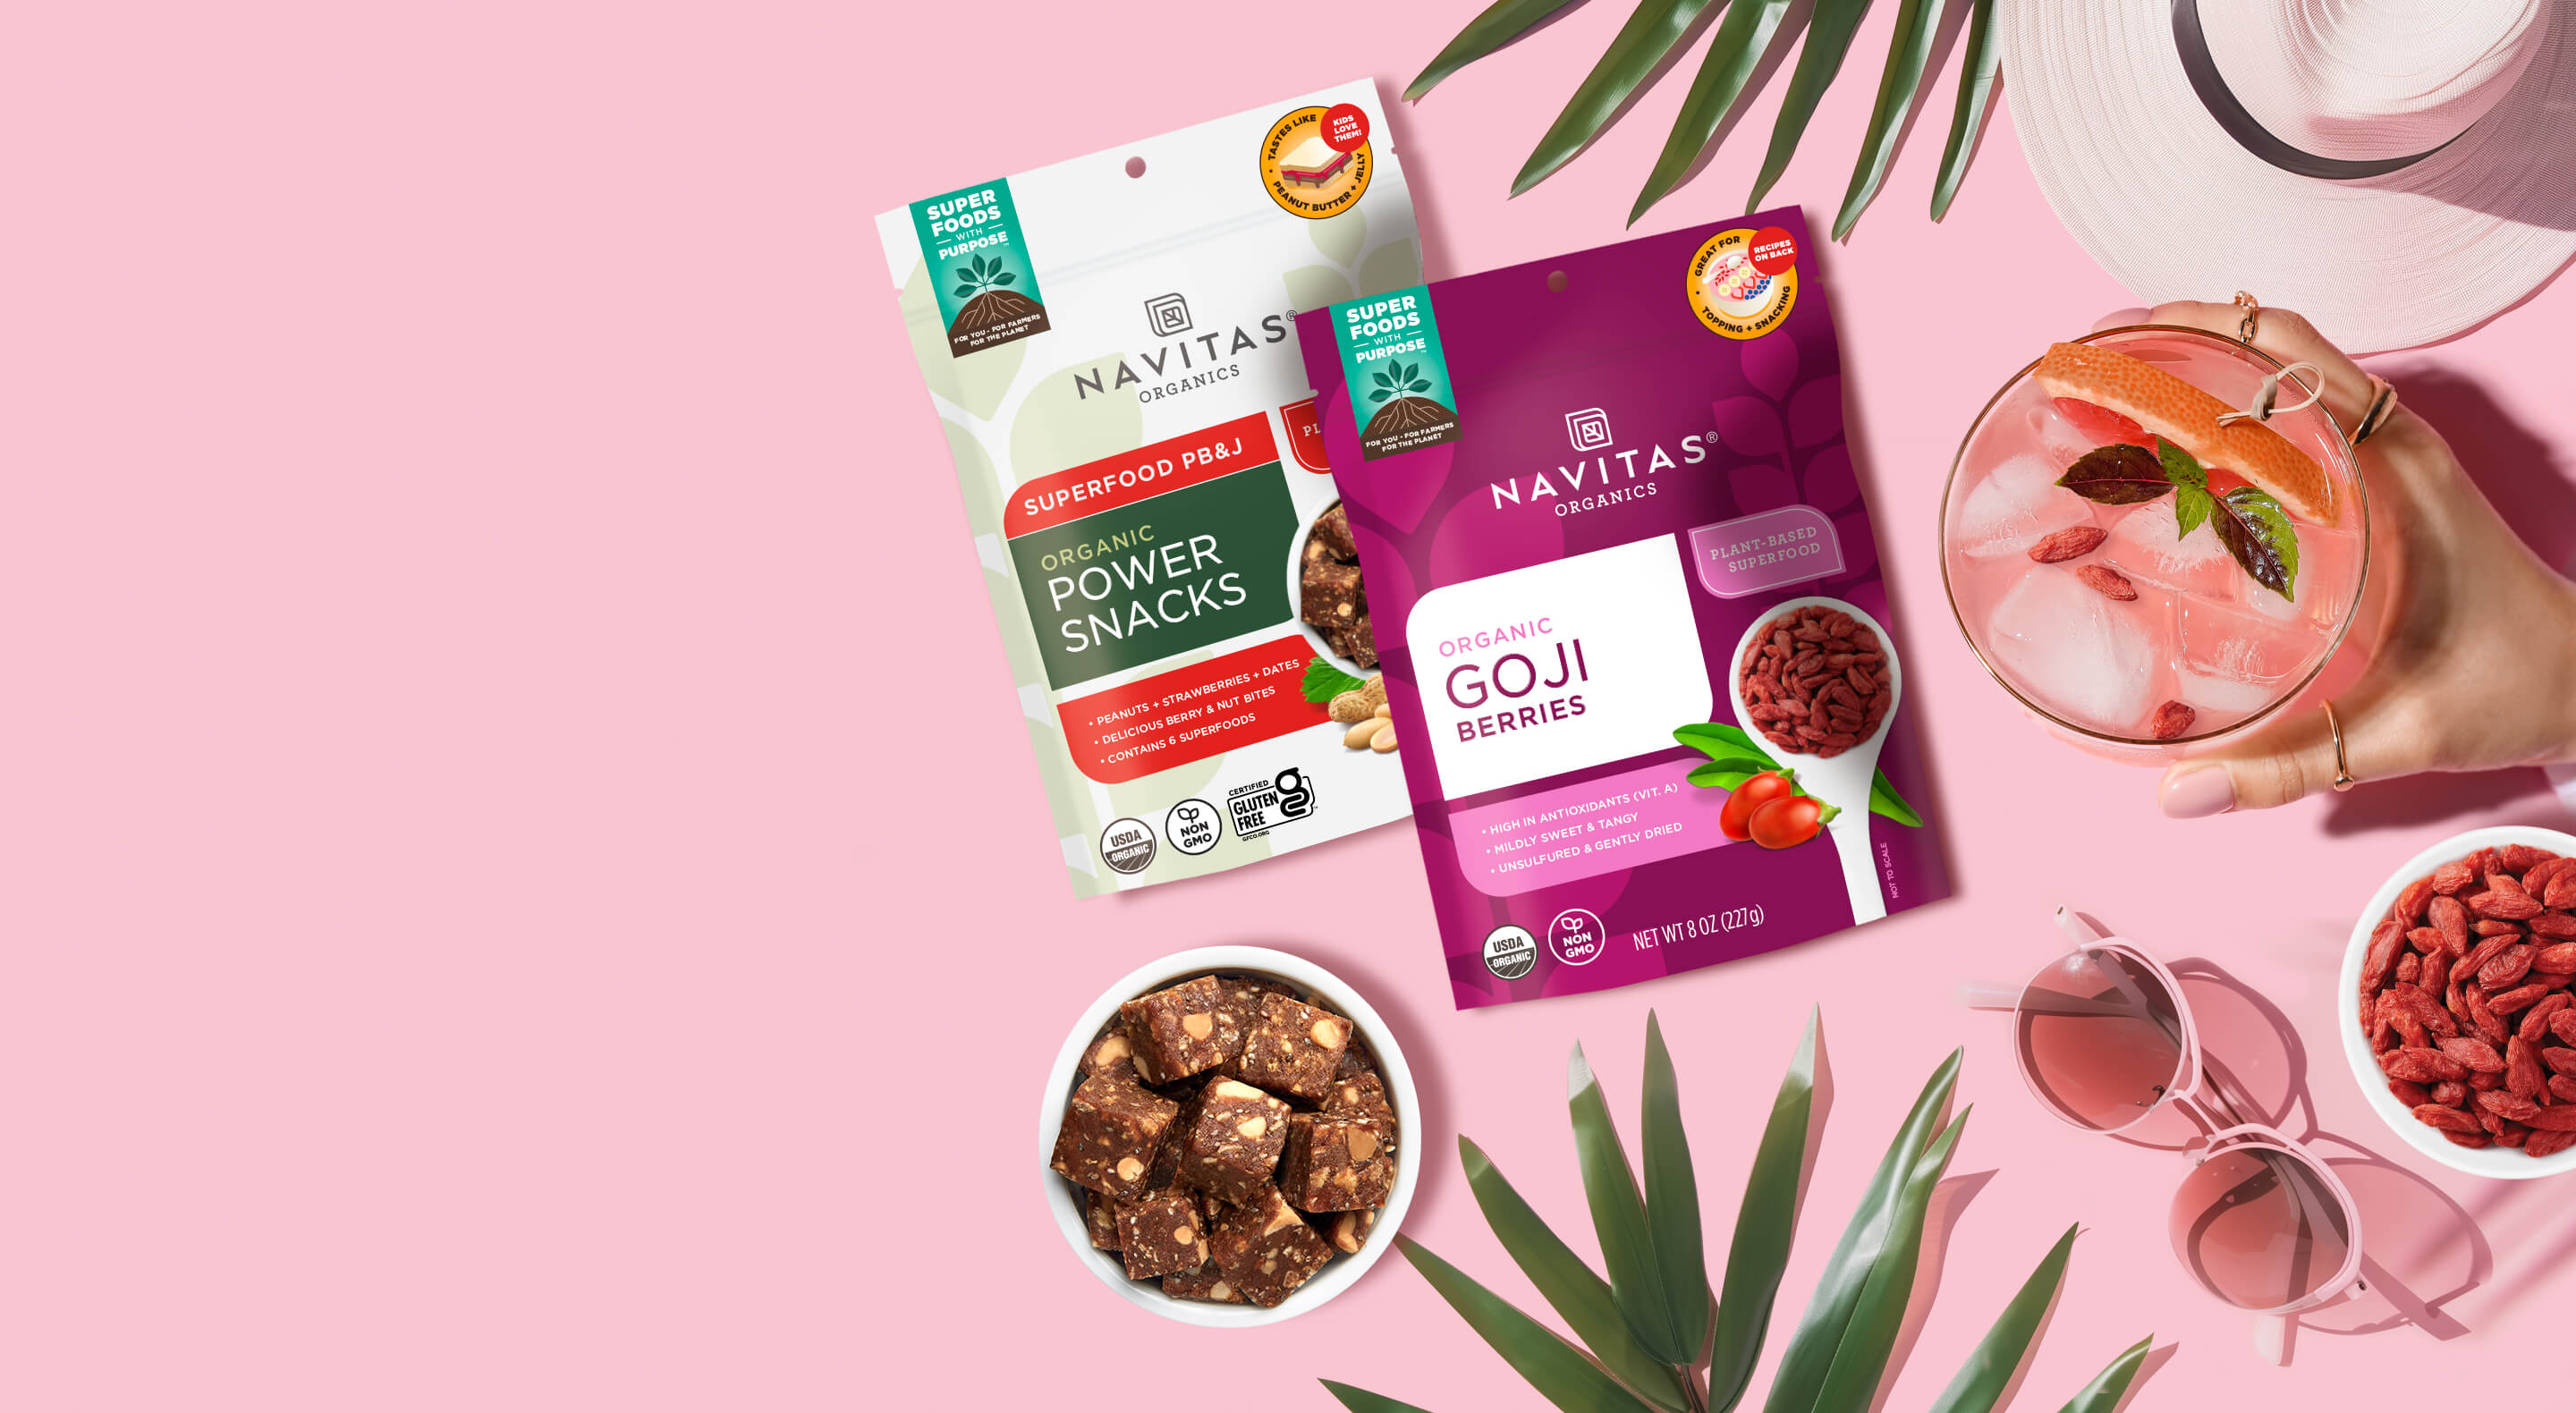 Navitas Organics PB&J Power Snacks and Goji Berries with summer accessories and an iced drink